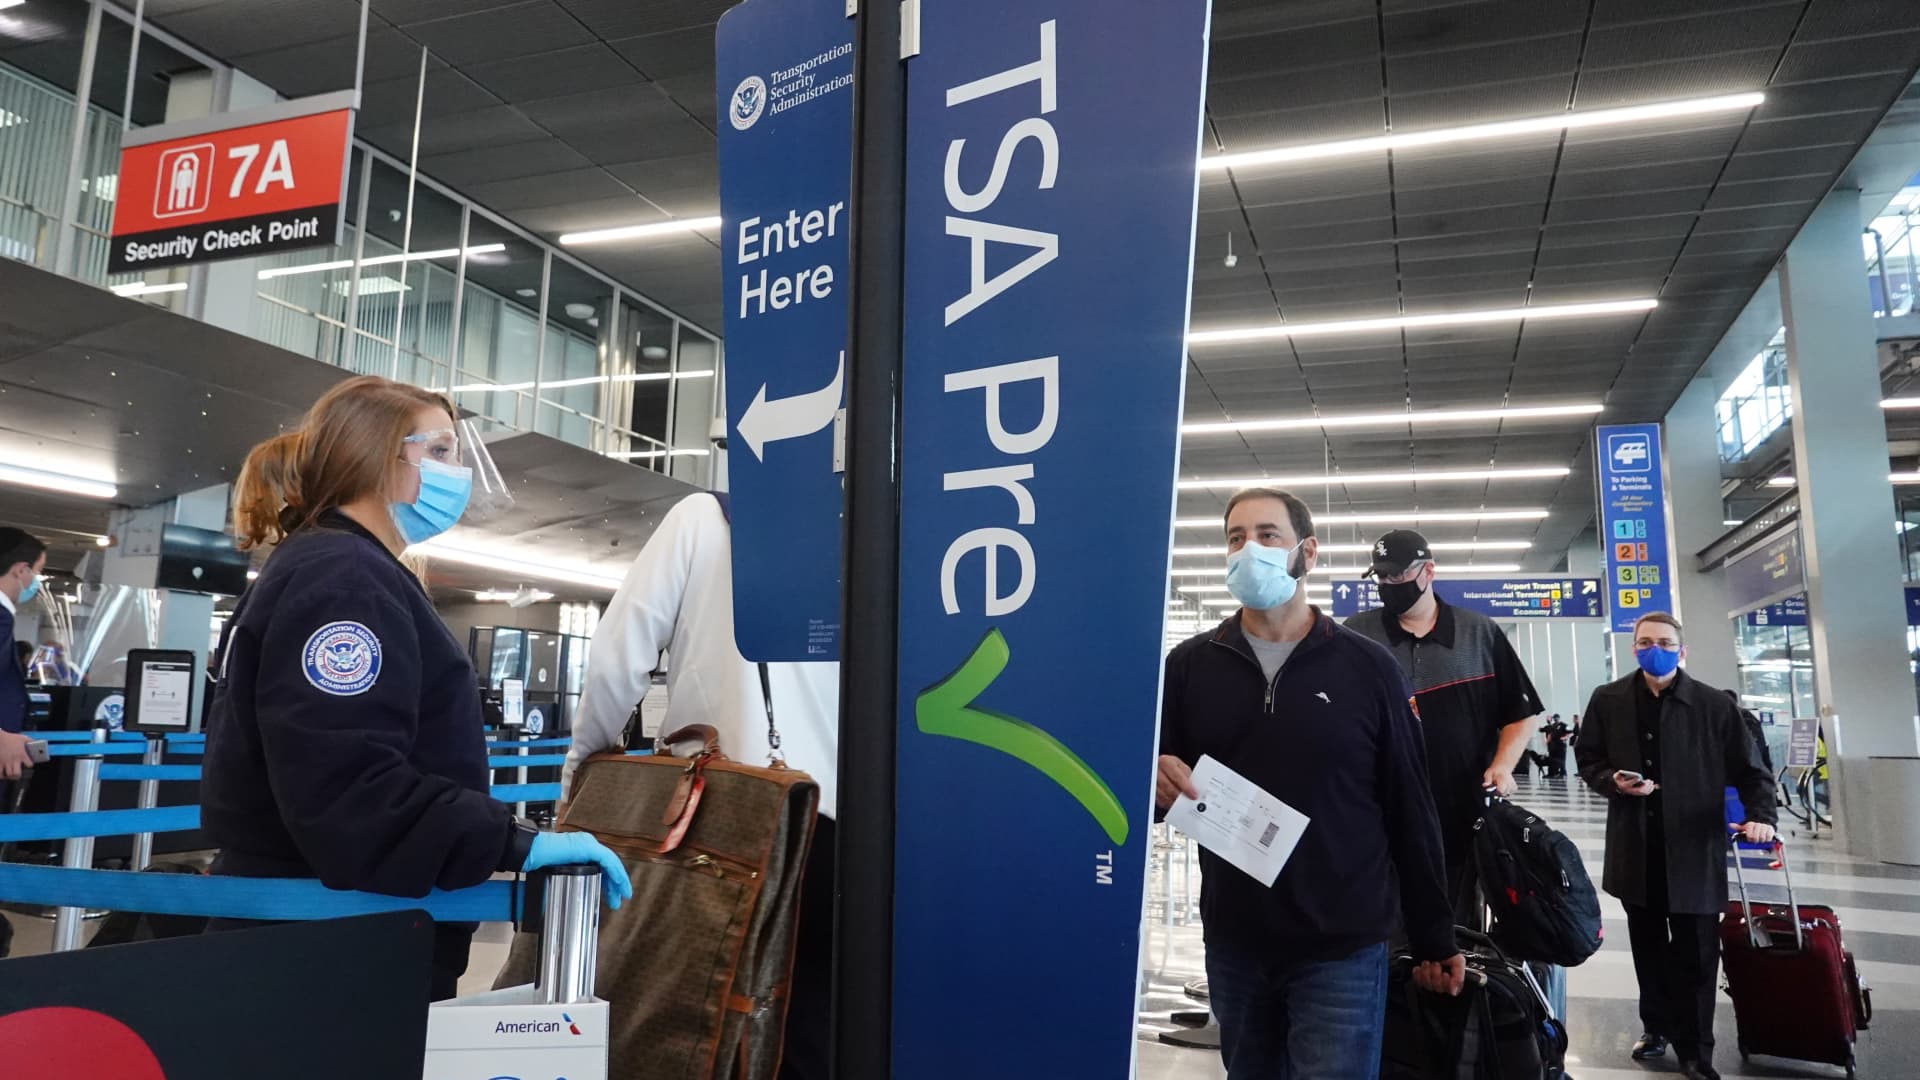 Passengers enter a Transportation Security Administration (TSA) checkpoint at O'Hare International Airport on October 19, 2020 in Chicago, Illinois.